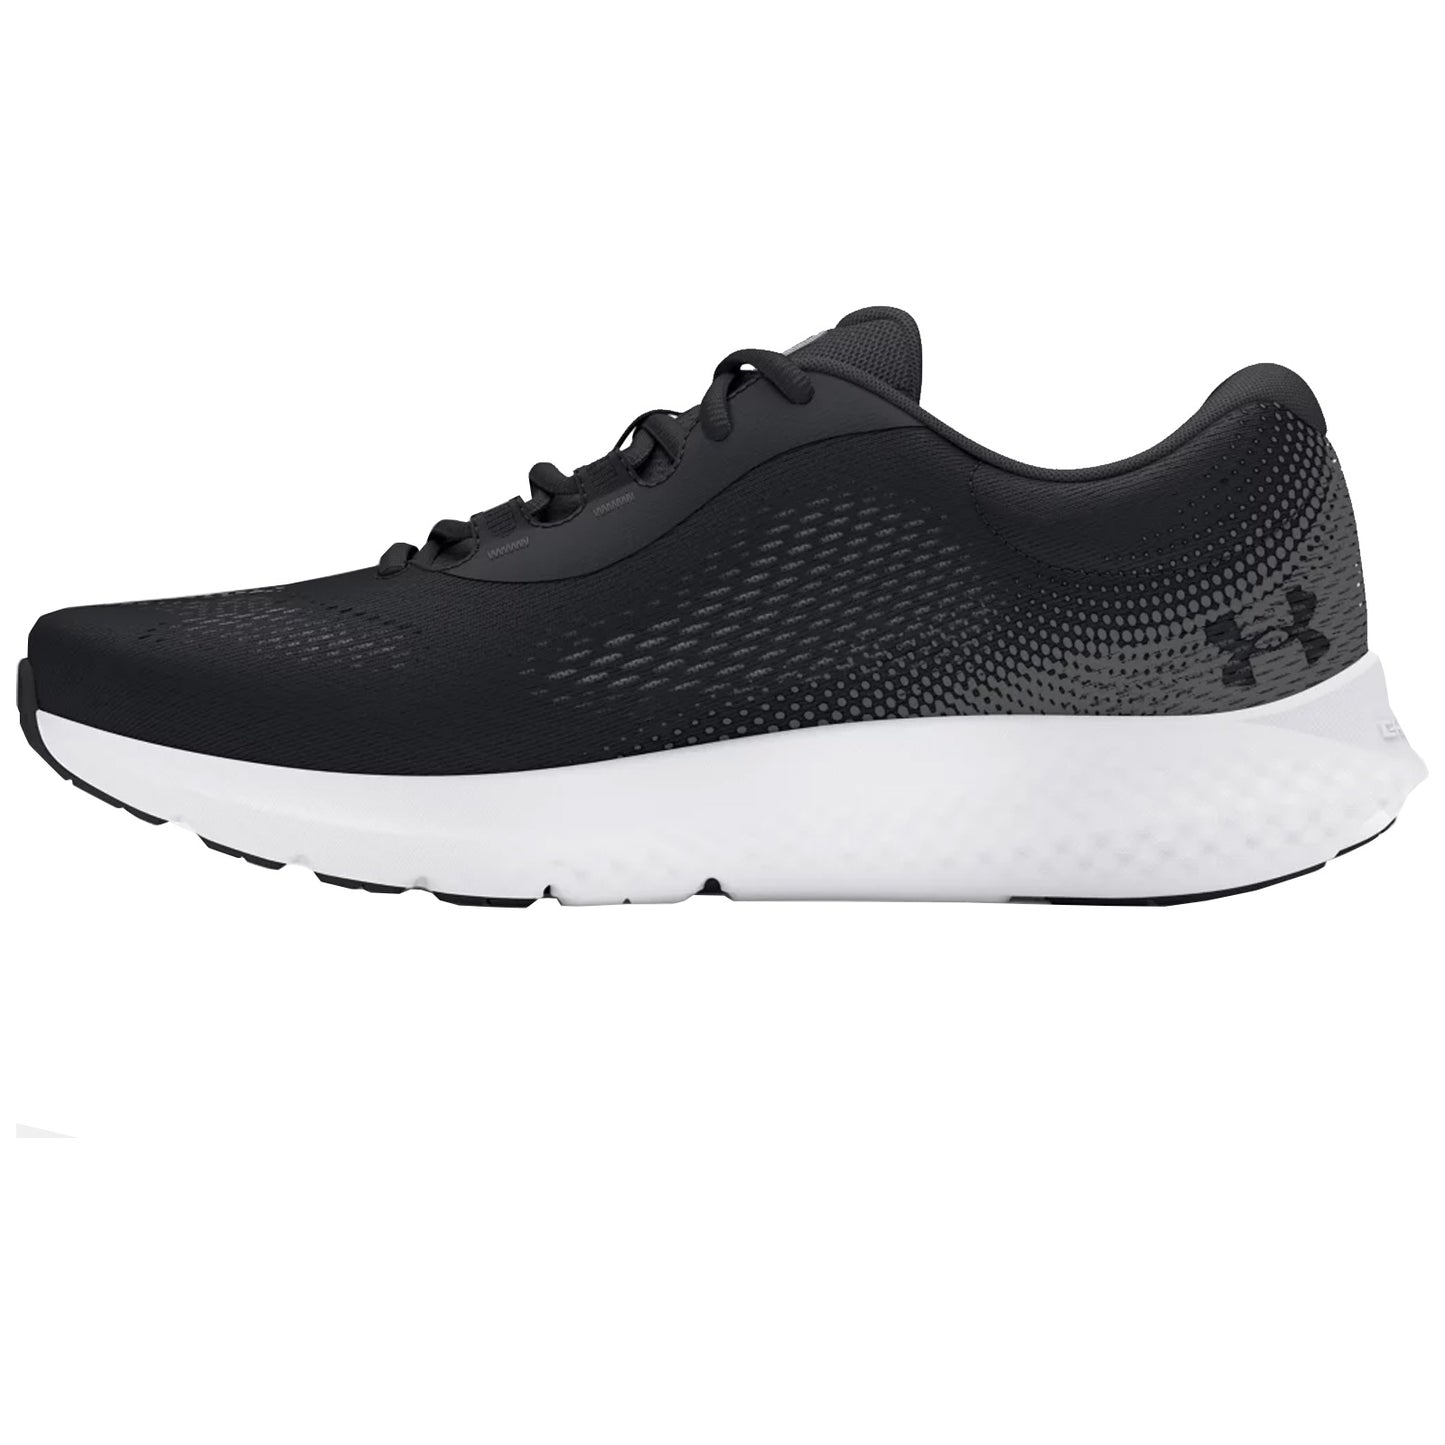 Under Armour Ladies Charged Rogue 4 Trainers